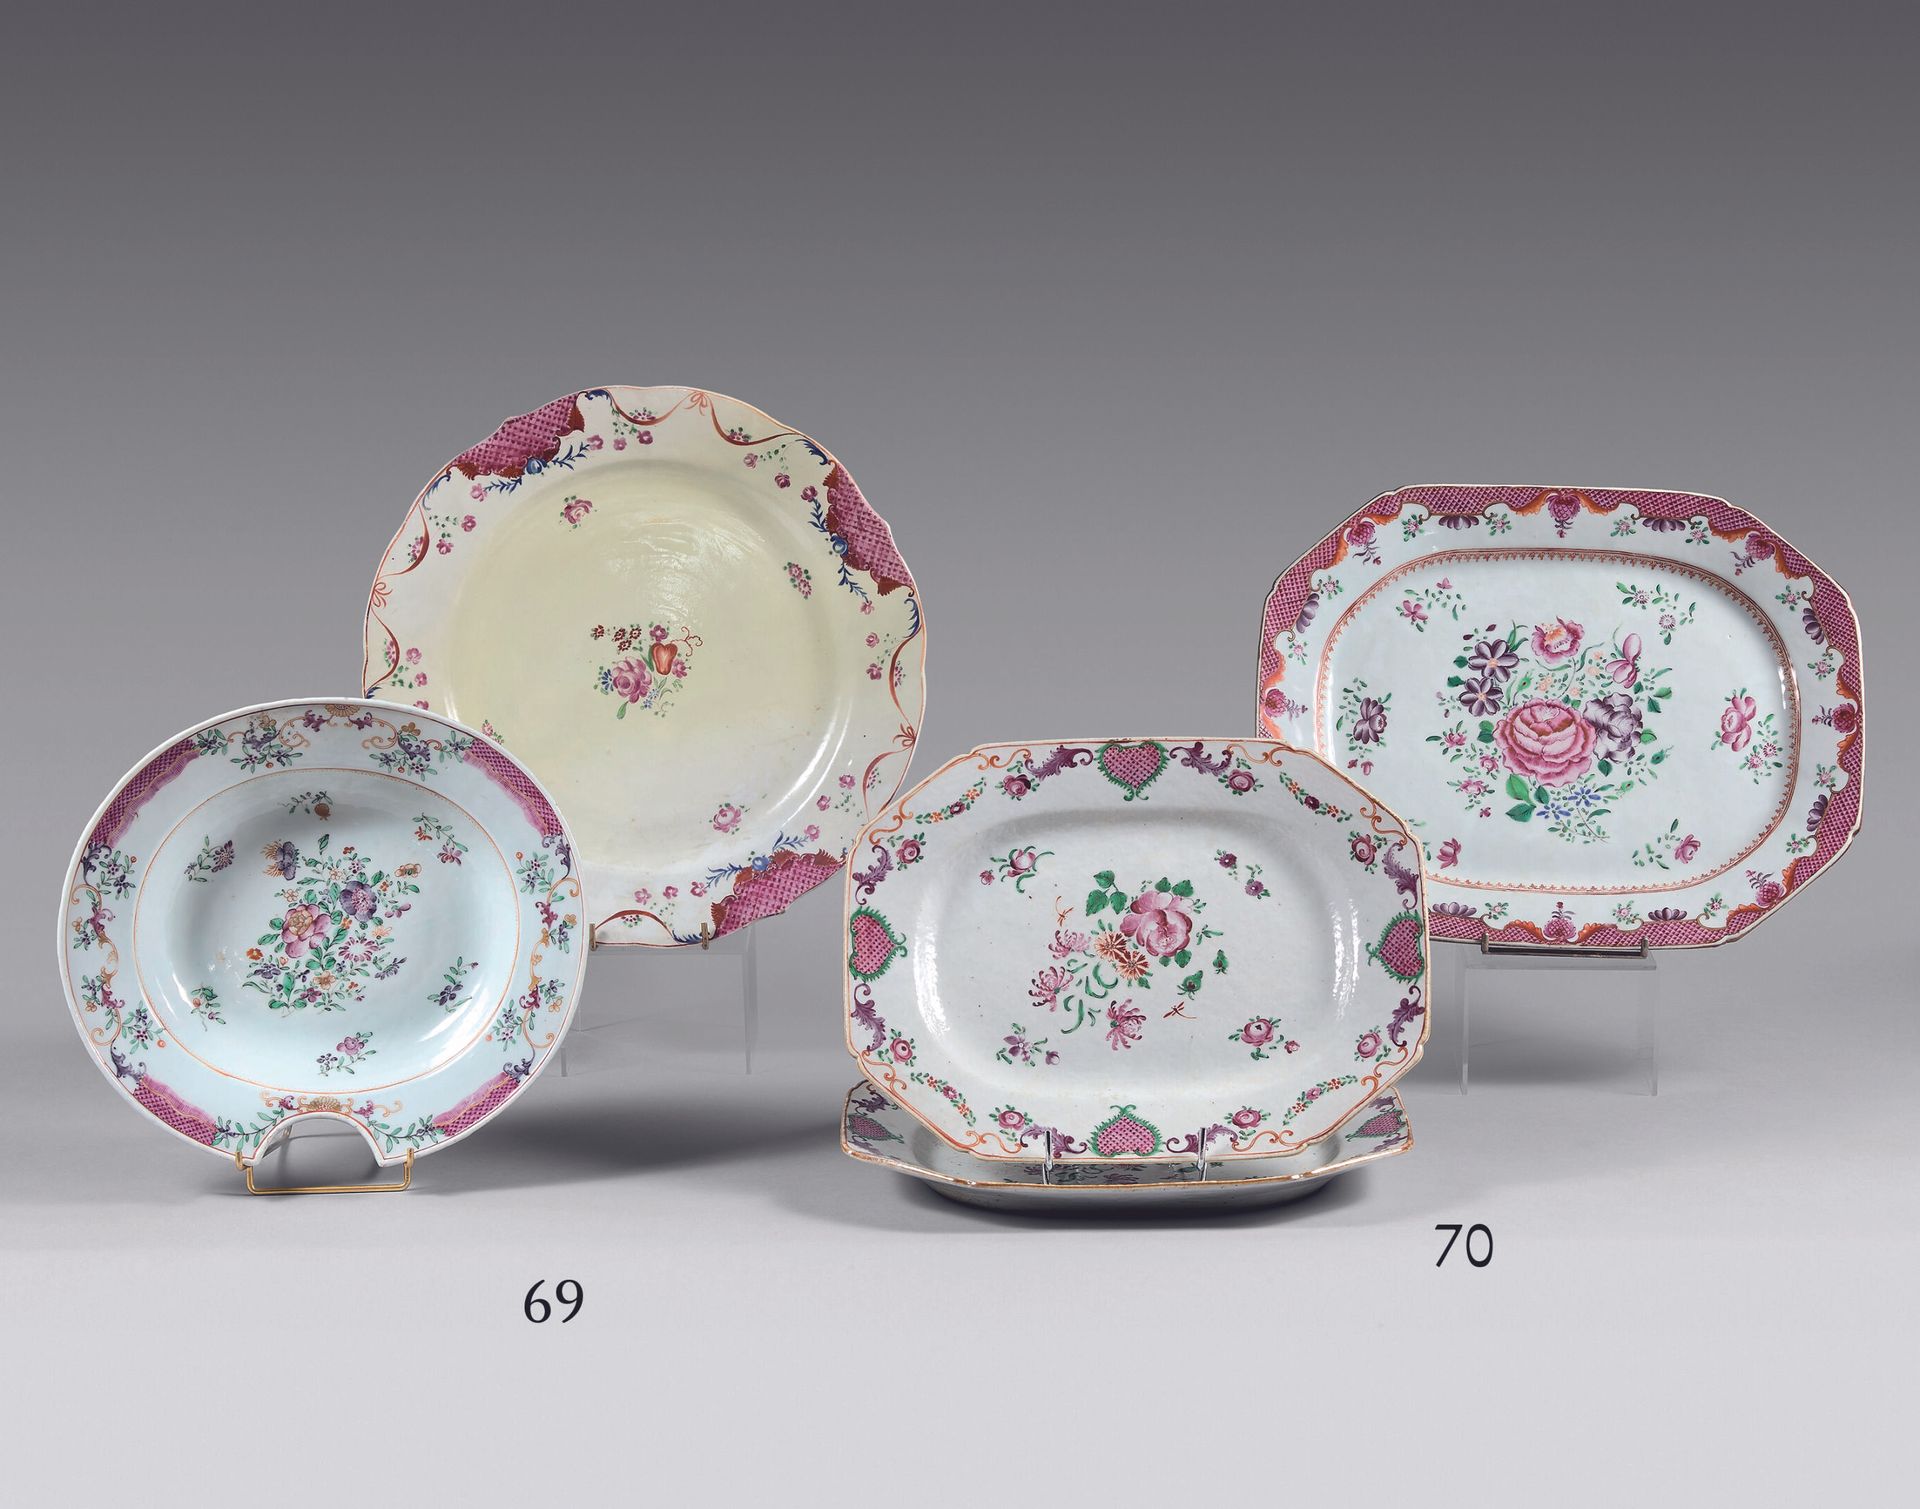 Null CHINA, Compagnie des Indes
Two dishes that can form a pair, octagonal shape&hellip;